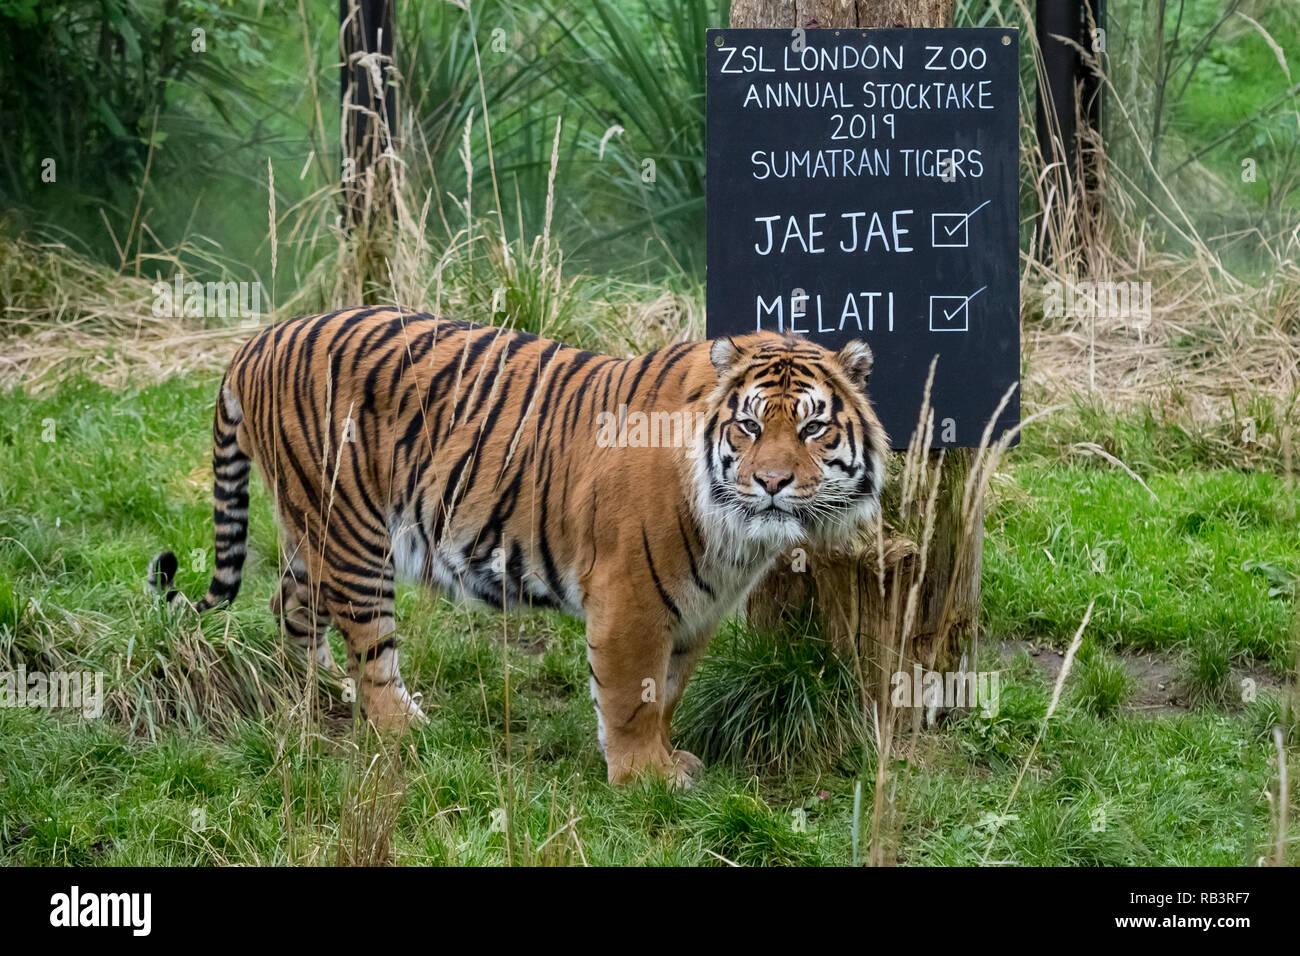 Annual Animal Stocktake at ZSL London Zoo begins. It takes almost a week to complete as more than 700 different species are counted. Stock Photo